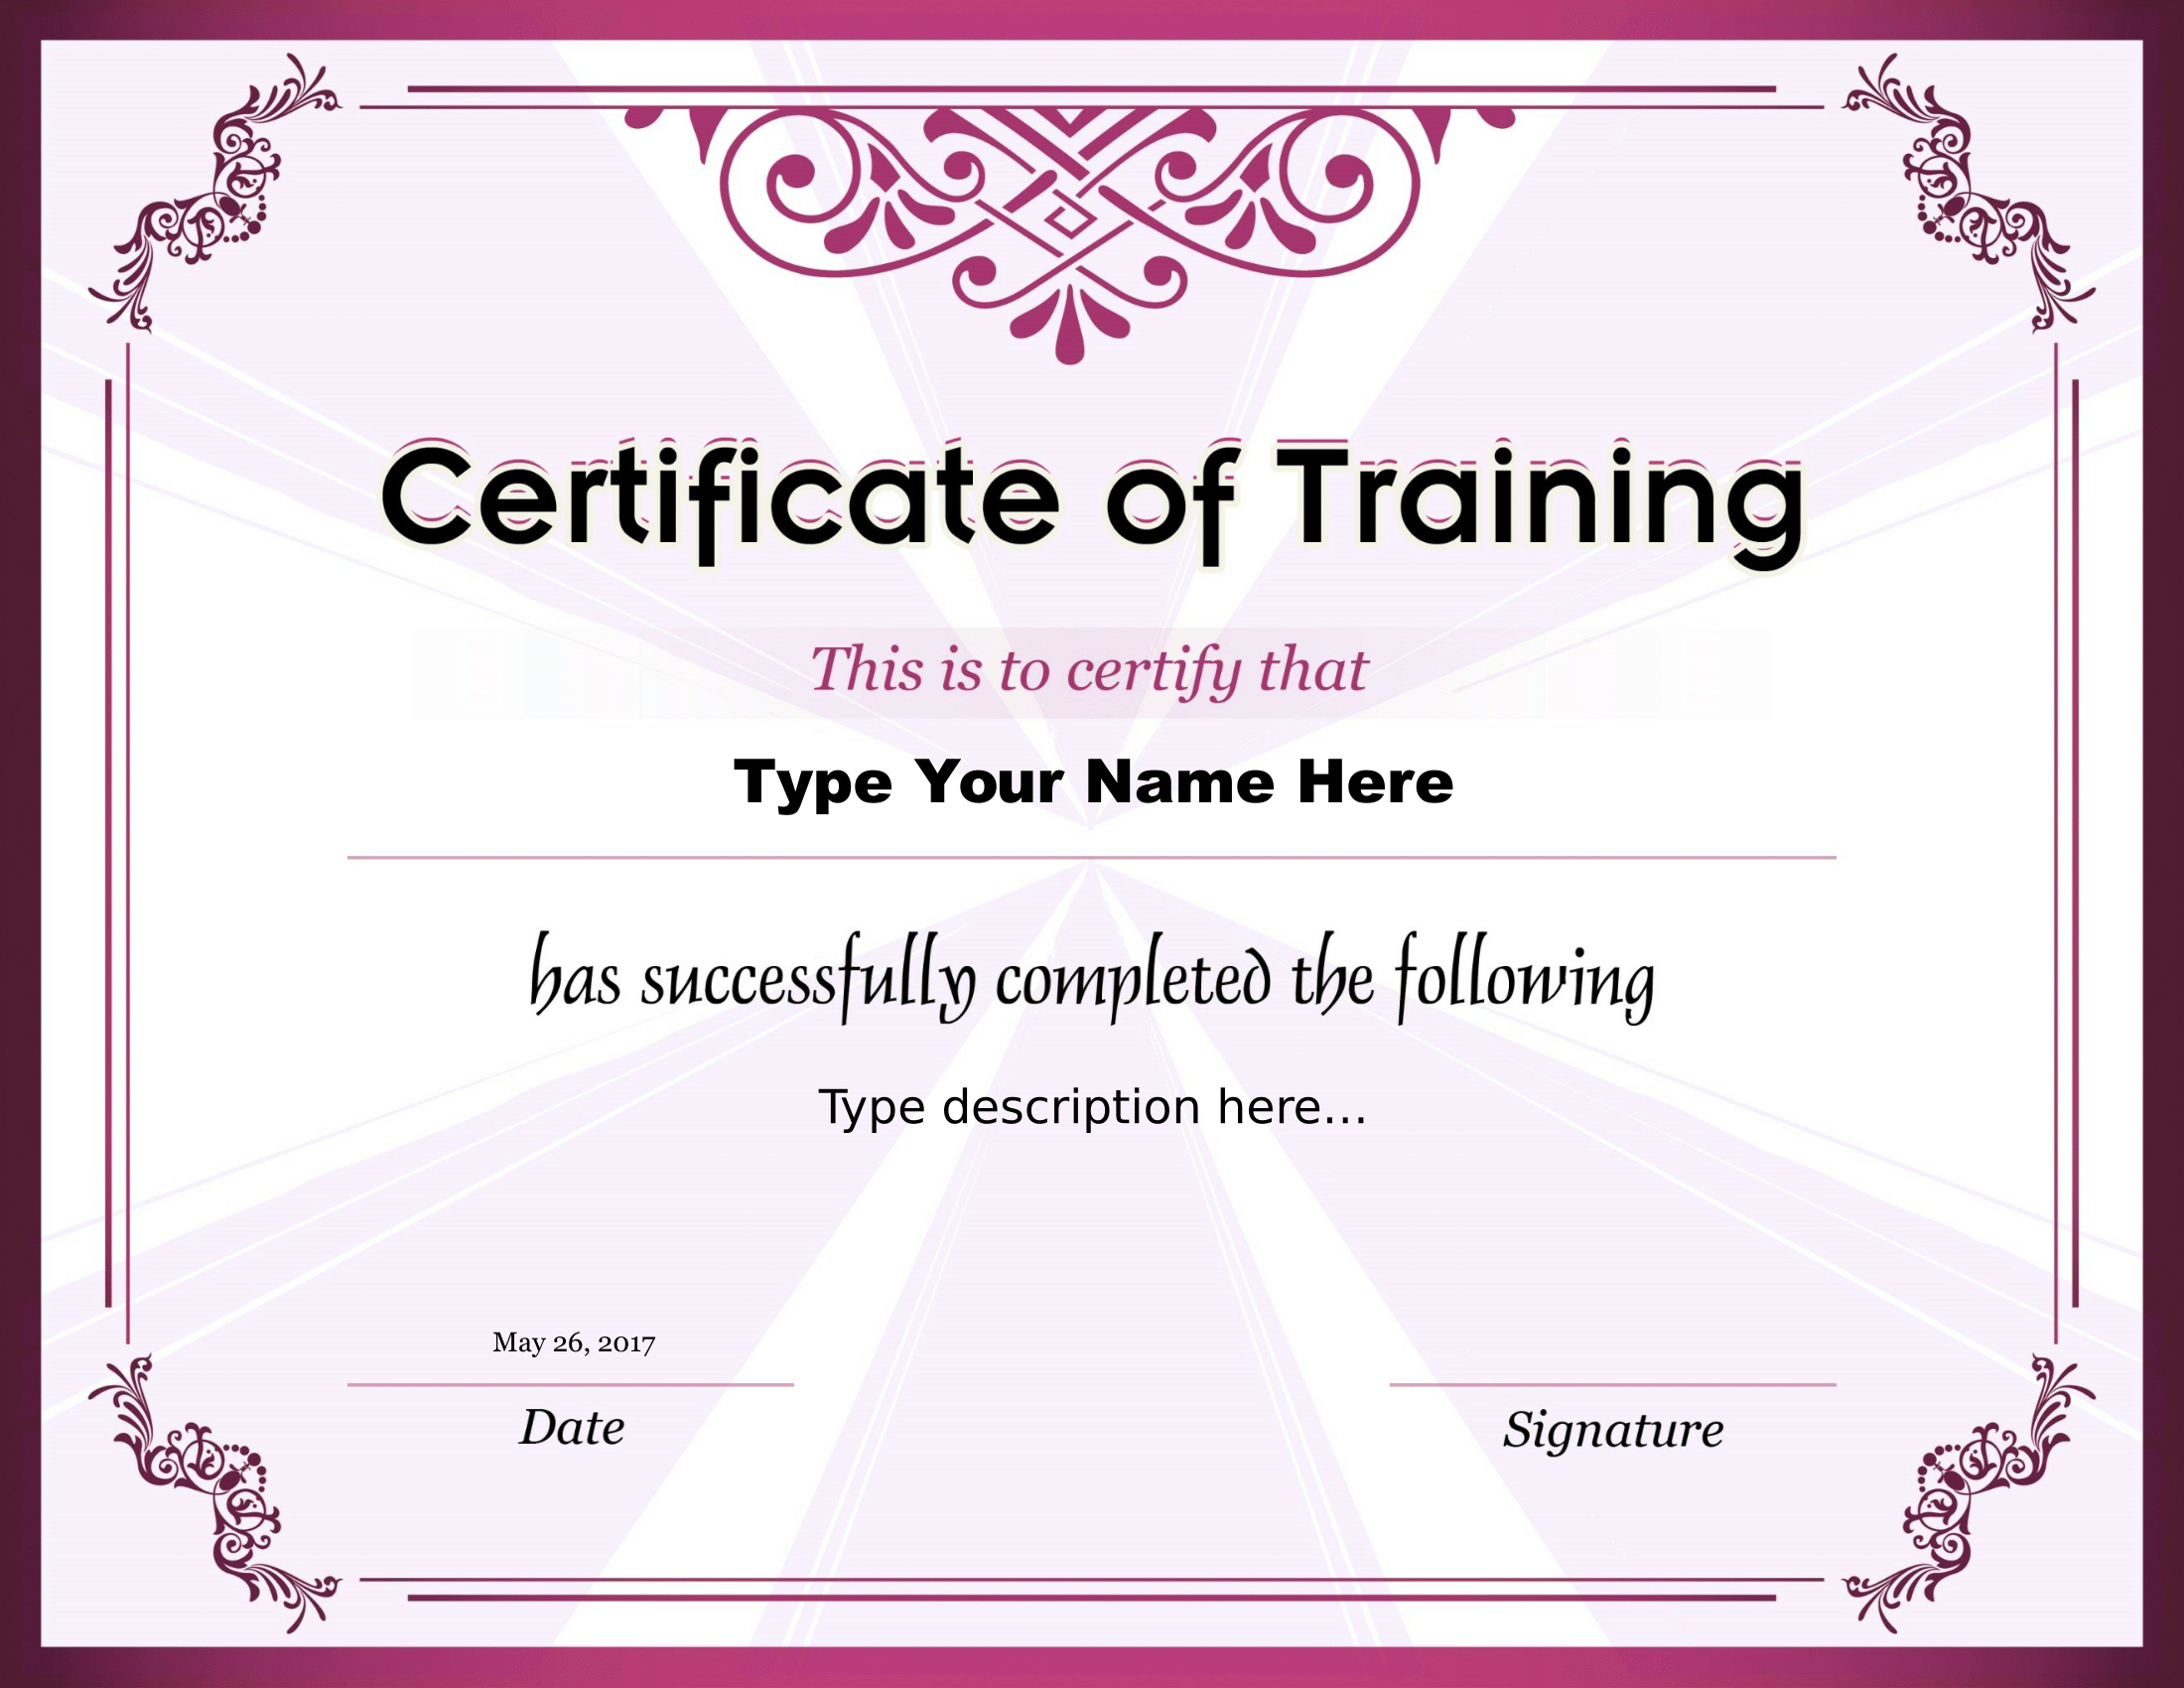 Certificate of Training – FREE Download